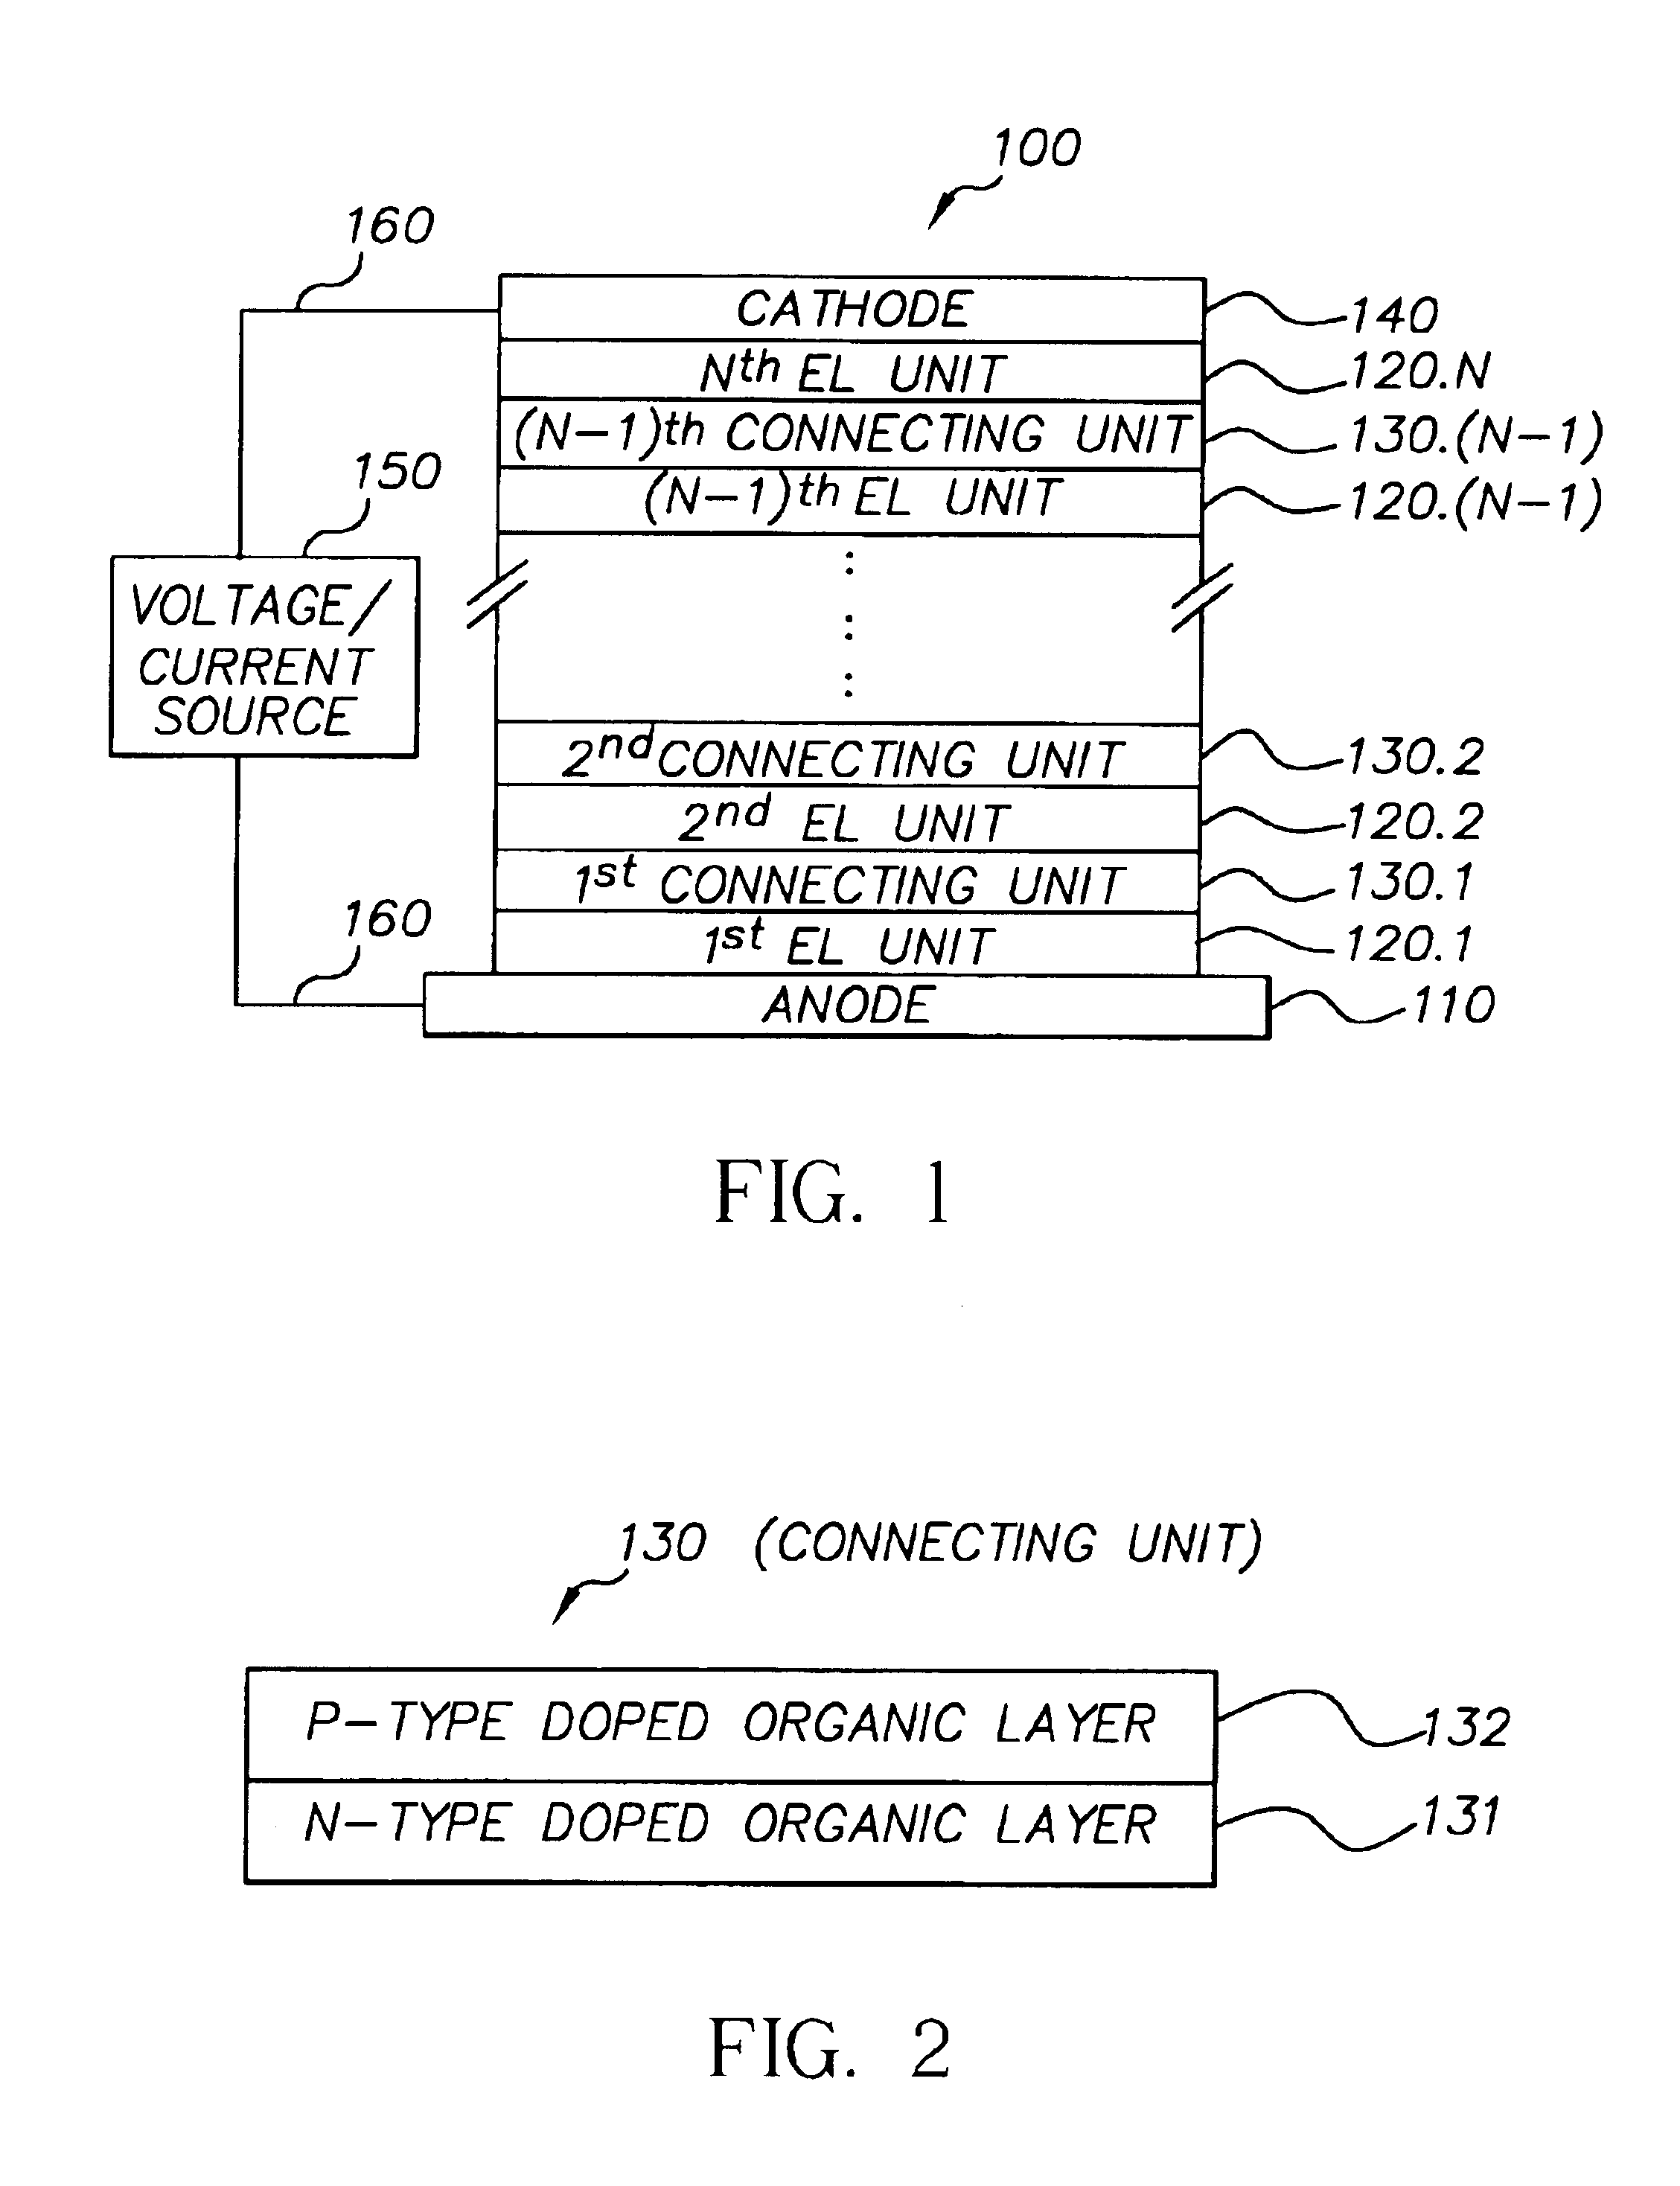 Cascaded organic electroluminescent device having connecting units with N-type and P-type organic layers